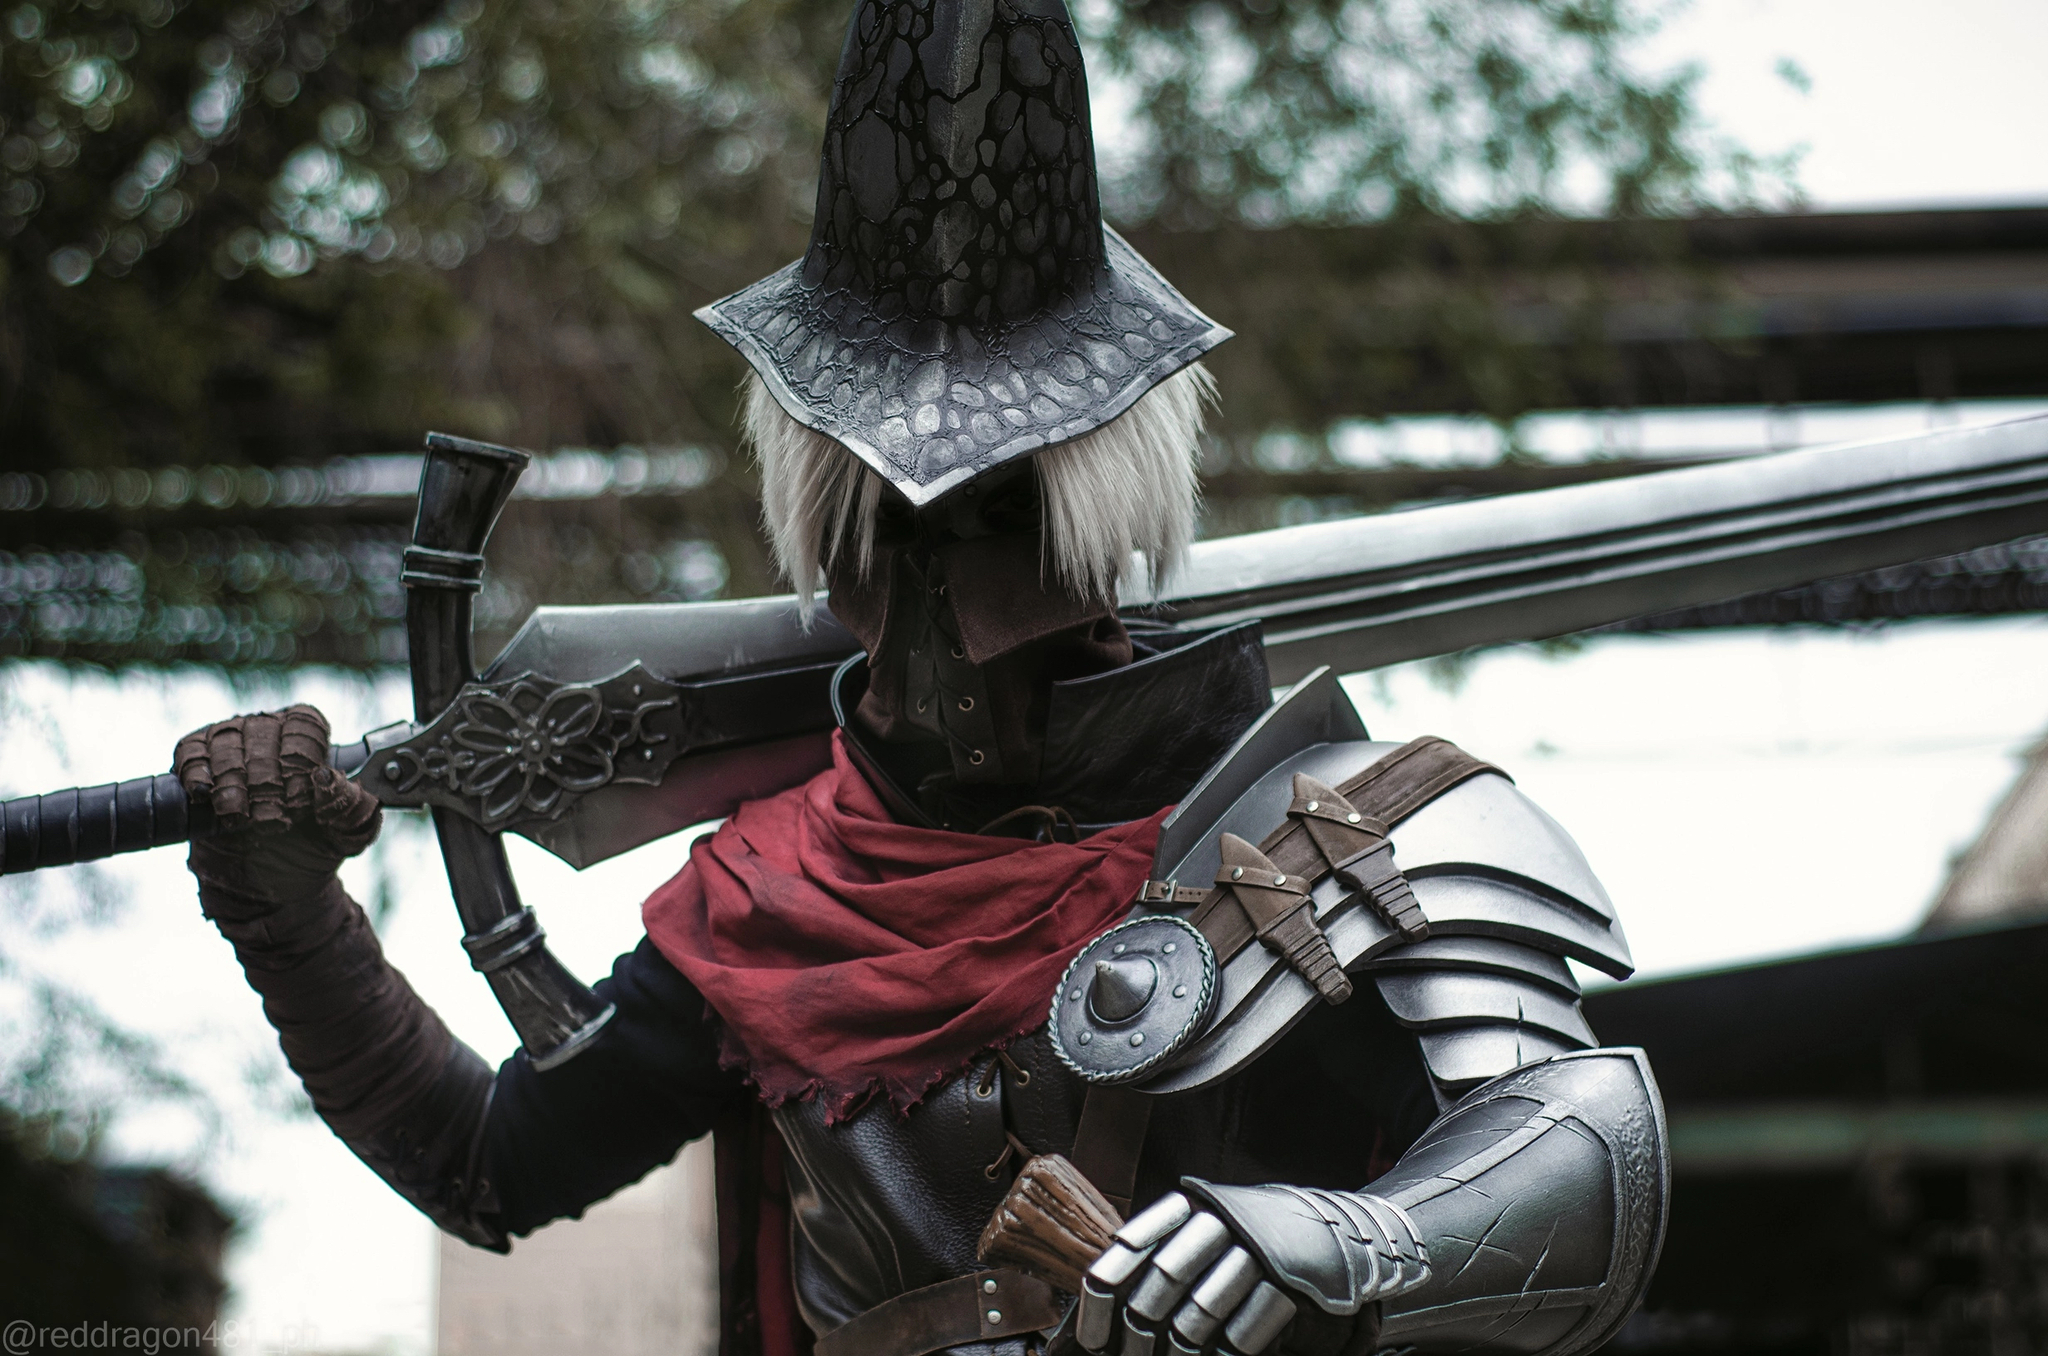 Cosplay of the Guardian of the Abyss at Epic Con 2022 (photo, video) - My, Cosplay, Dark souls, Dark souls 3, Epic con, Abyss watchers, Guardians of the Abyss, Girls, Weapon, Video game, Fromsoftware, Craft, Handmade, Sword, Dark fantasy, Fantasy, Video, Soundless, Longpost